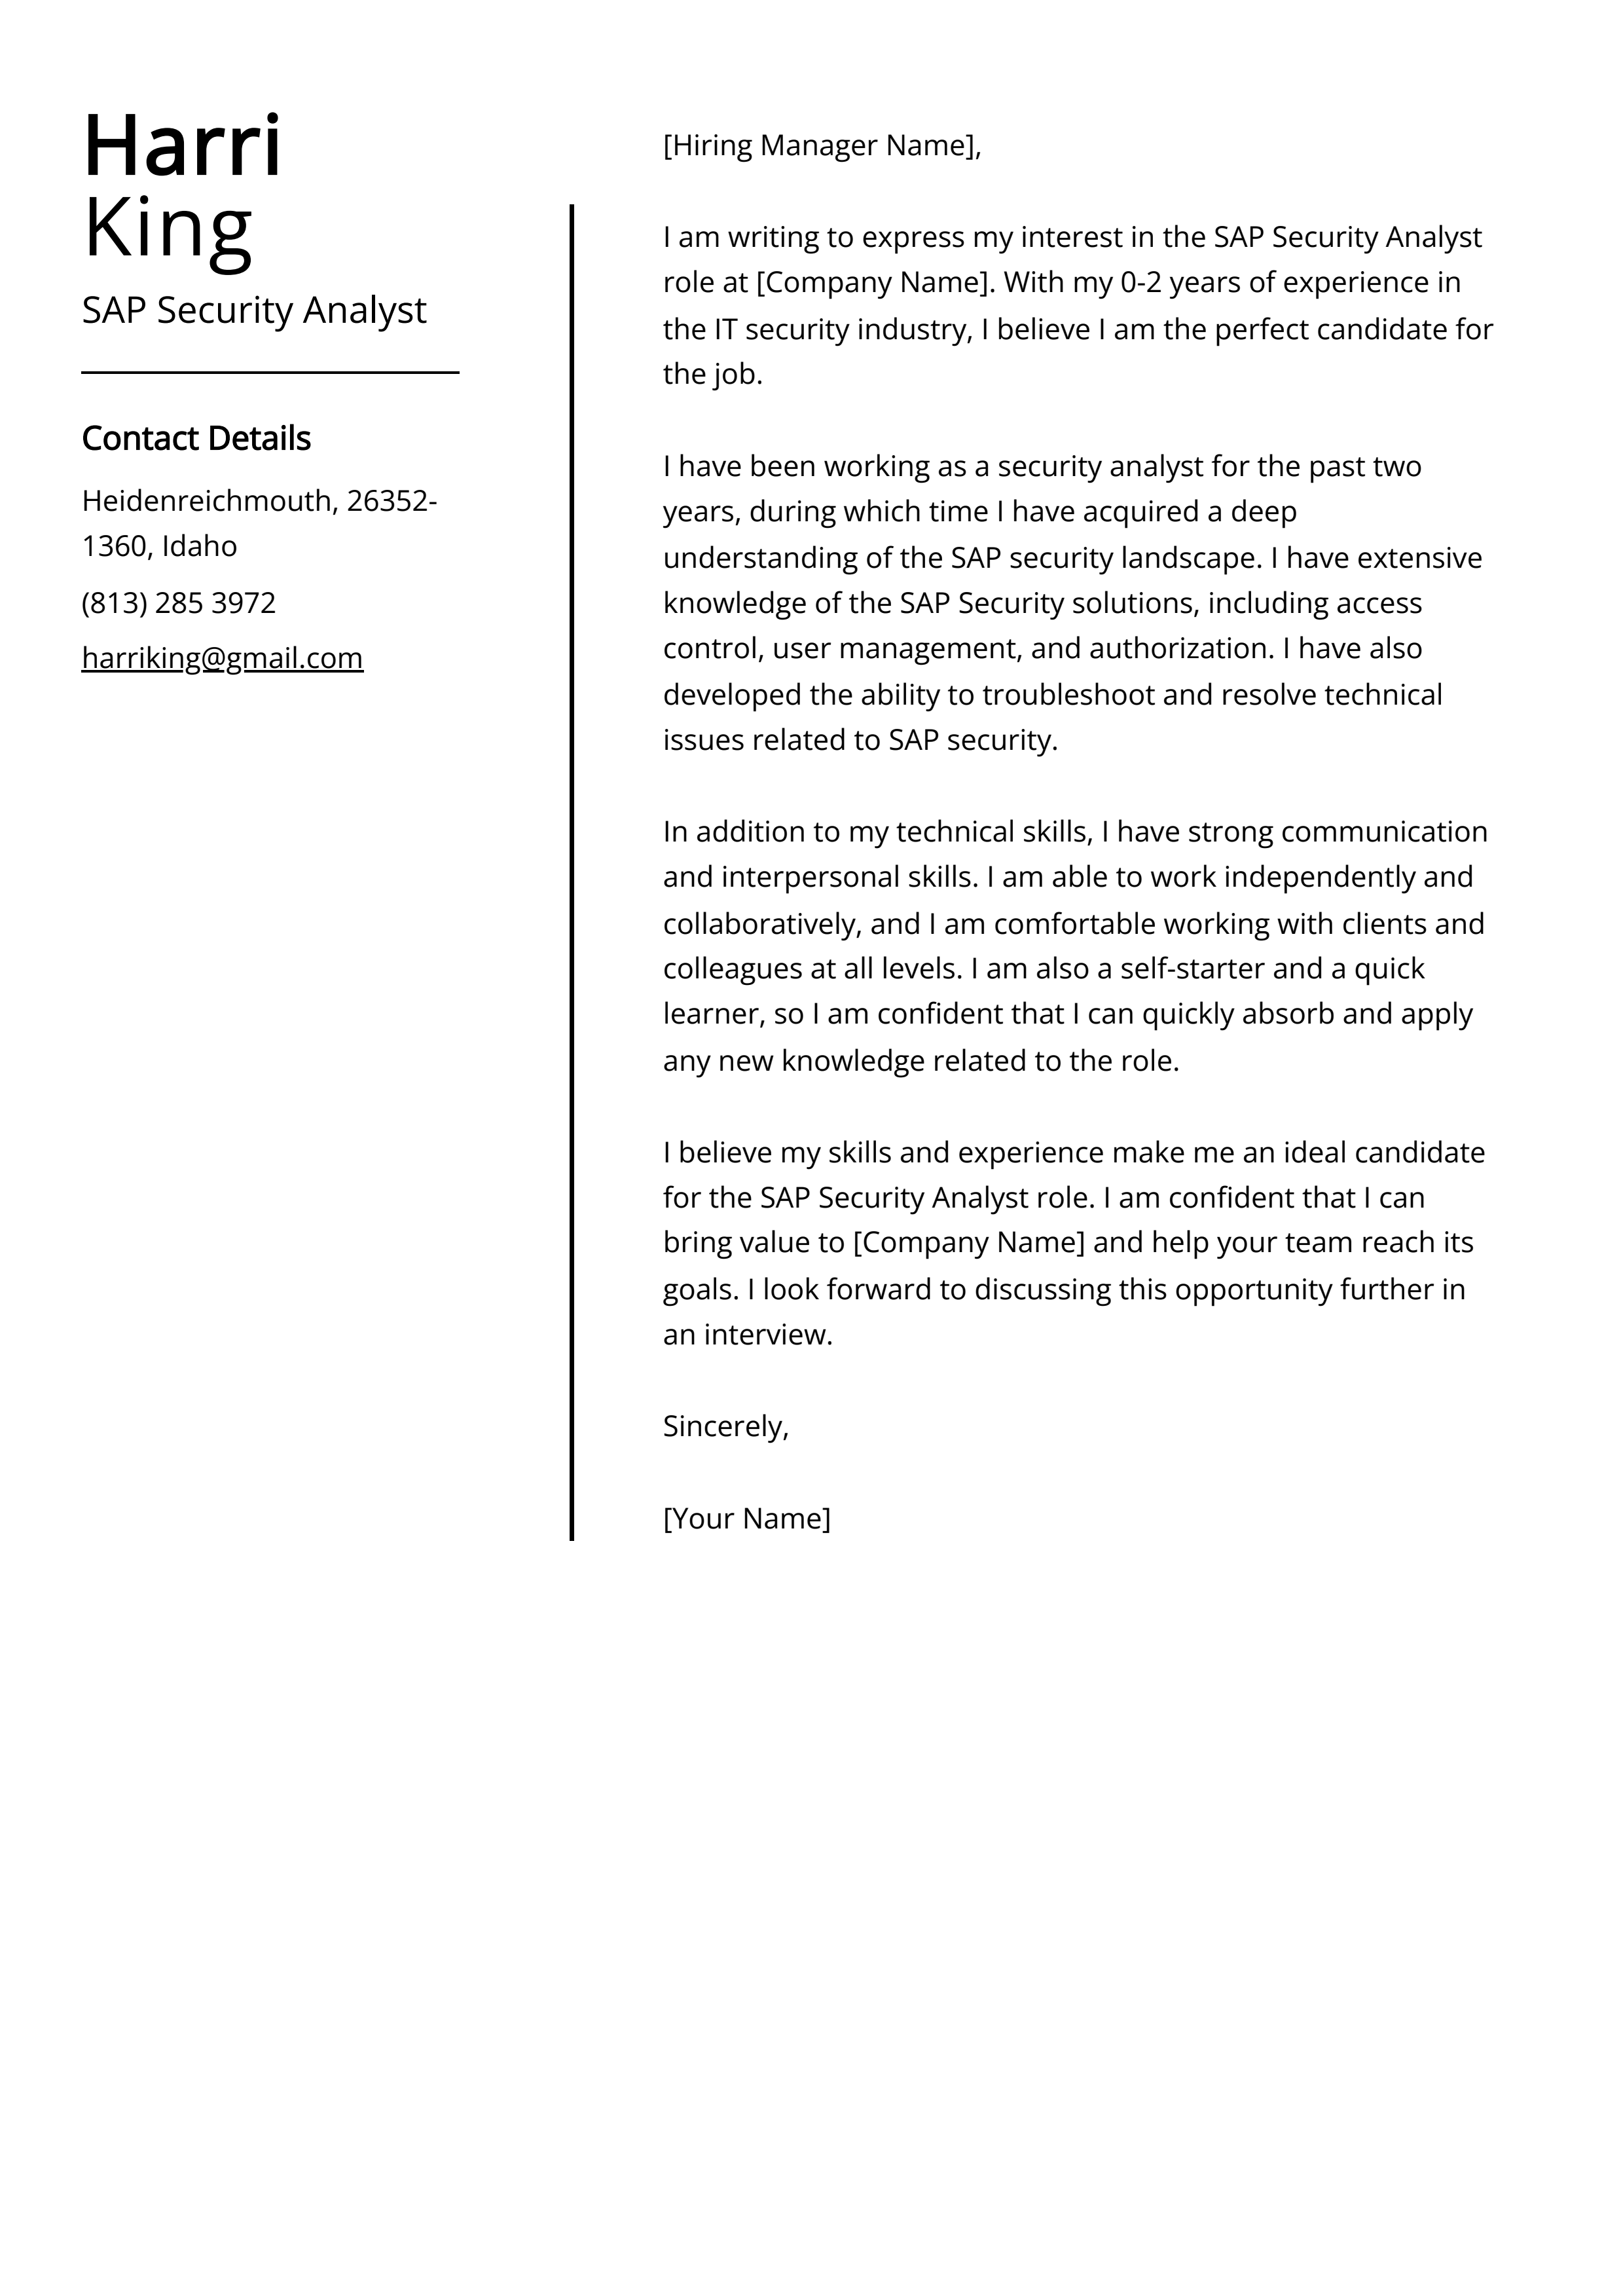 SAP Security Analyst Cover Letter Example